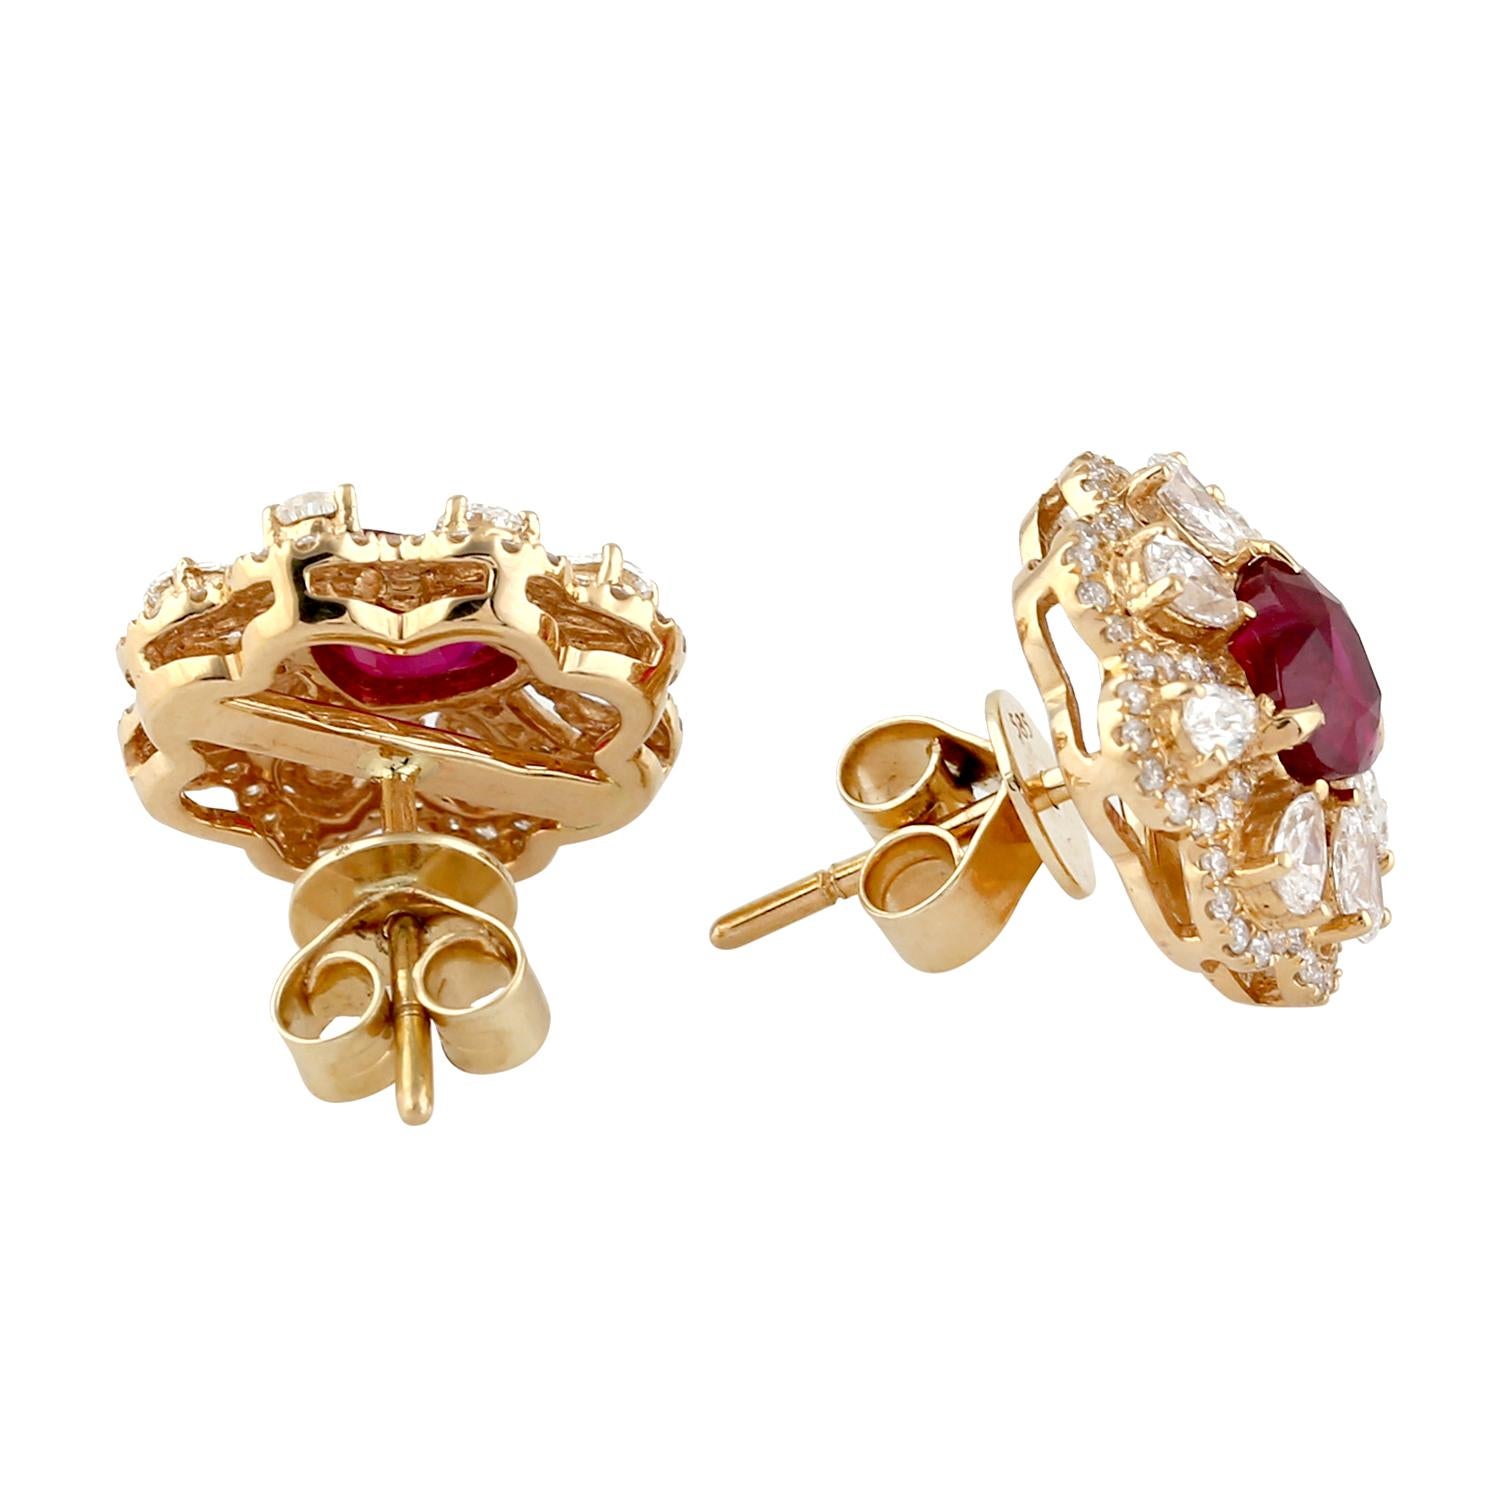 Cast from 14-karat gold, these beautiful stud earrings are hand set with 1.9 carats heart shape rubies & 1.3 carats of sparkling diamonds. 

FOLLOW  MEGHNA JEWELS storefront to view the latest collection & exclusive pieces.  Meghna Jewels is proudly